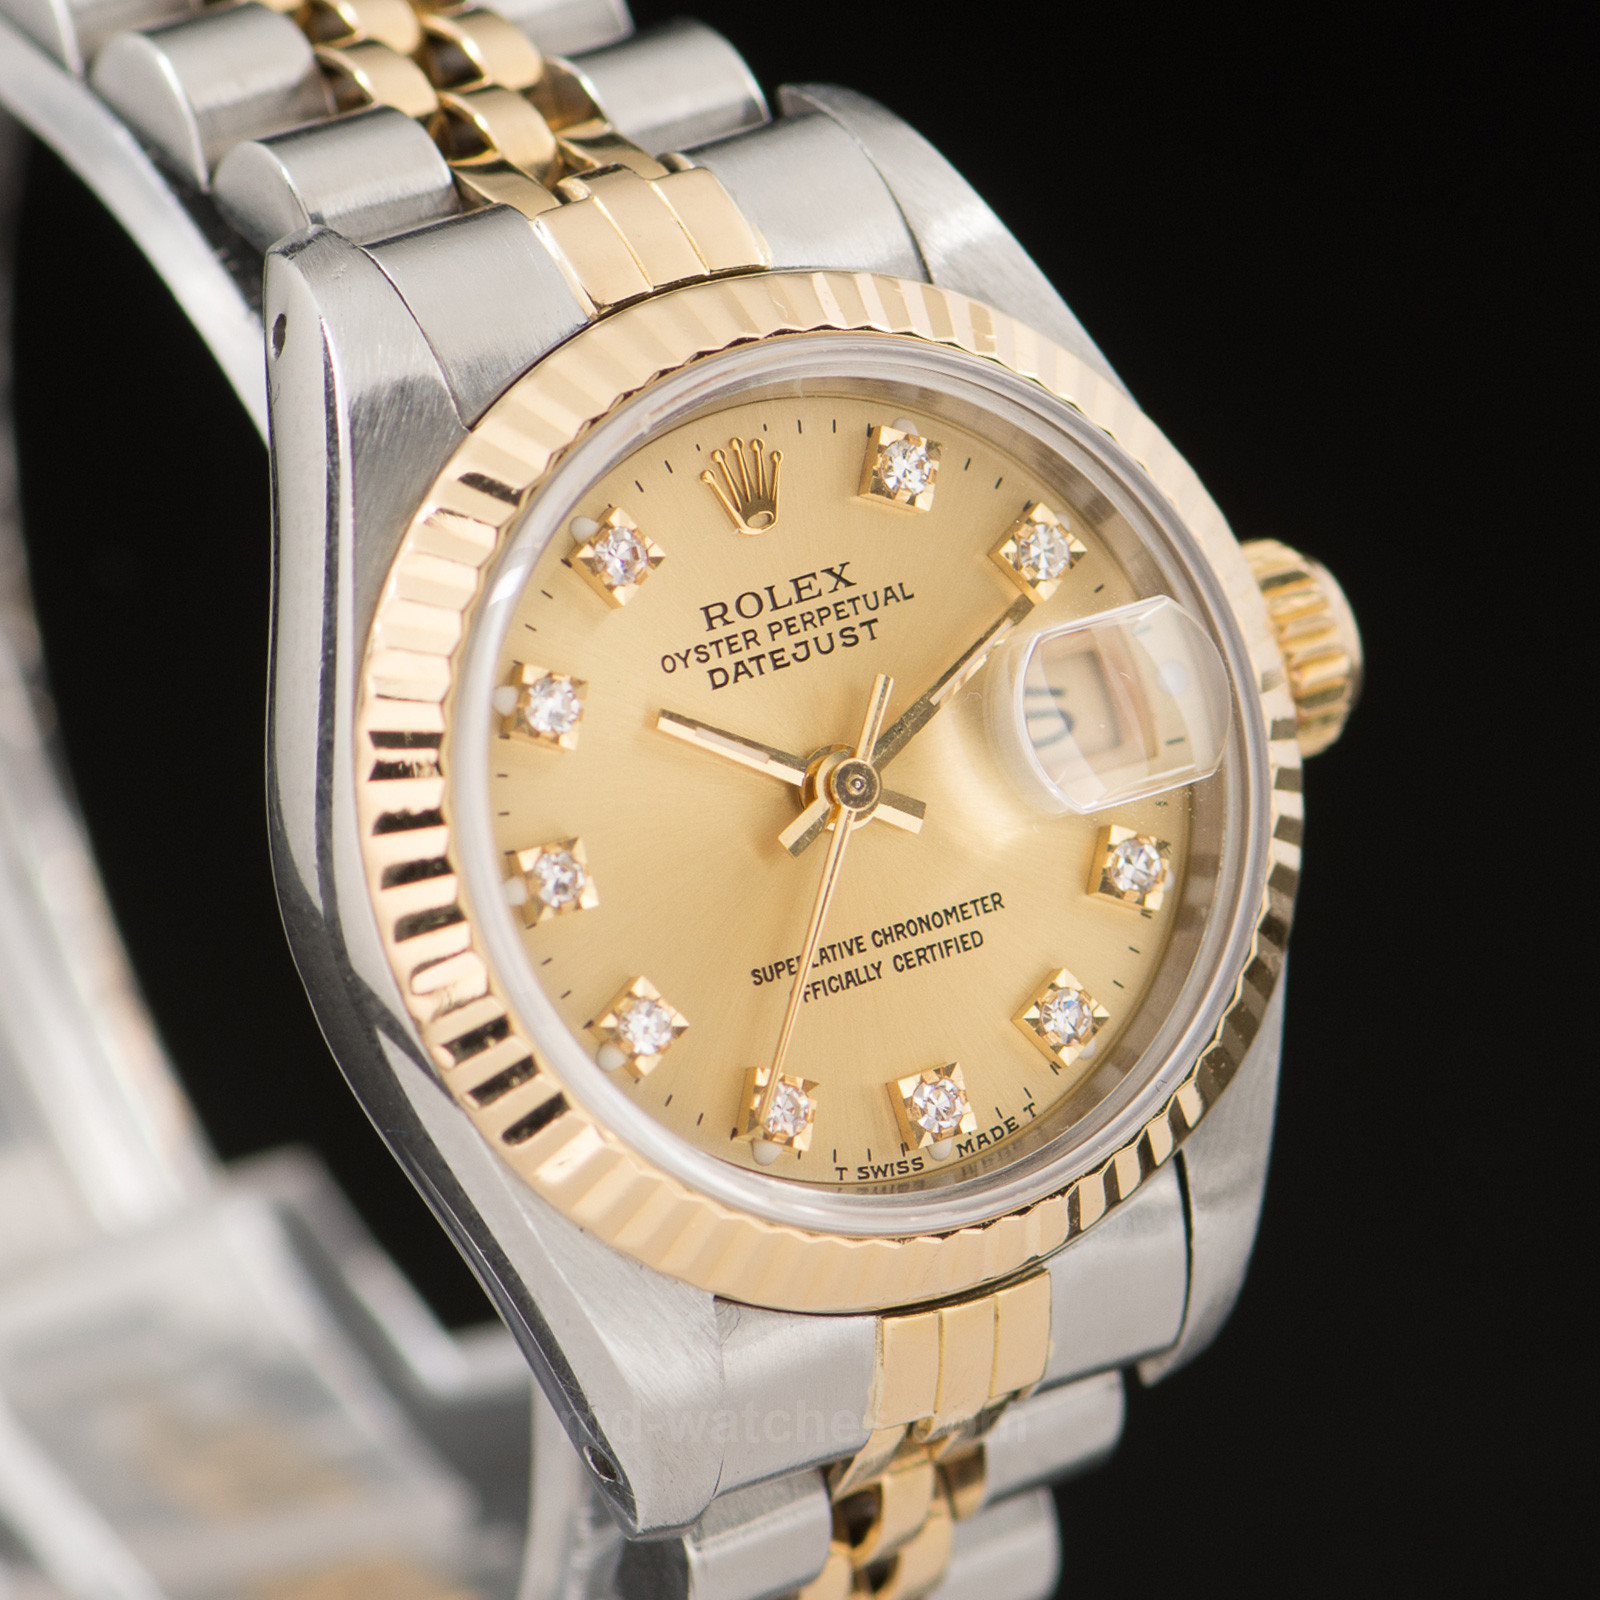 rolex oyster perpetual datejust superlative chronometer officially certified pret